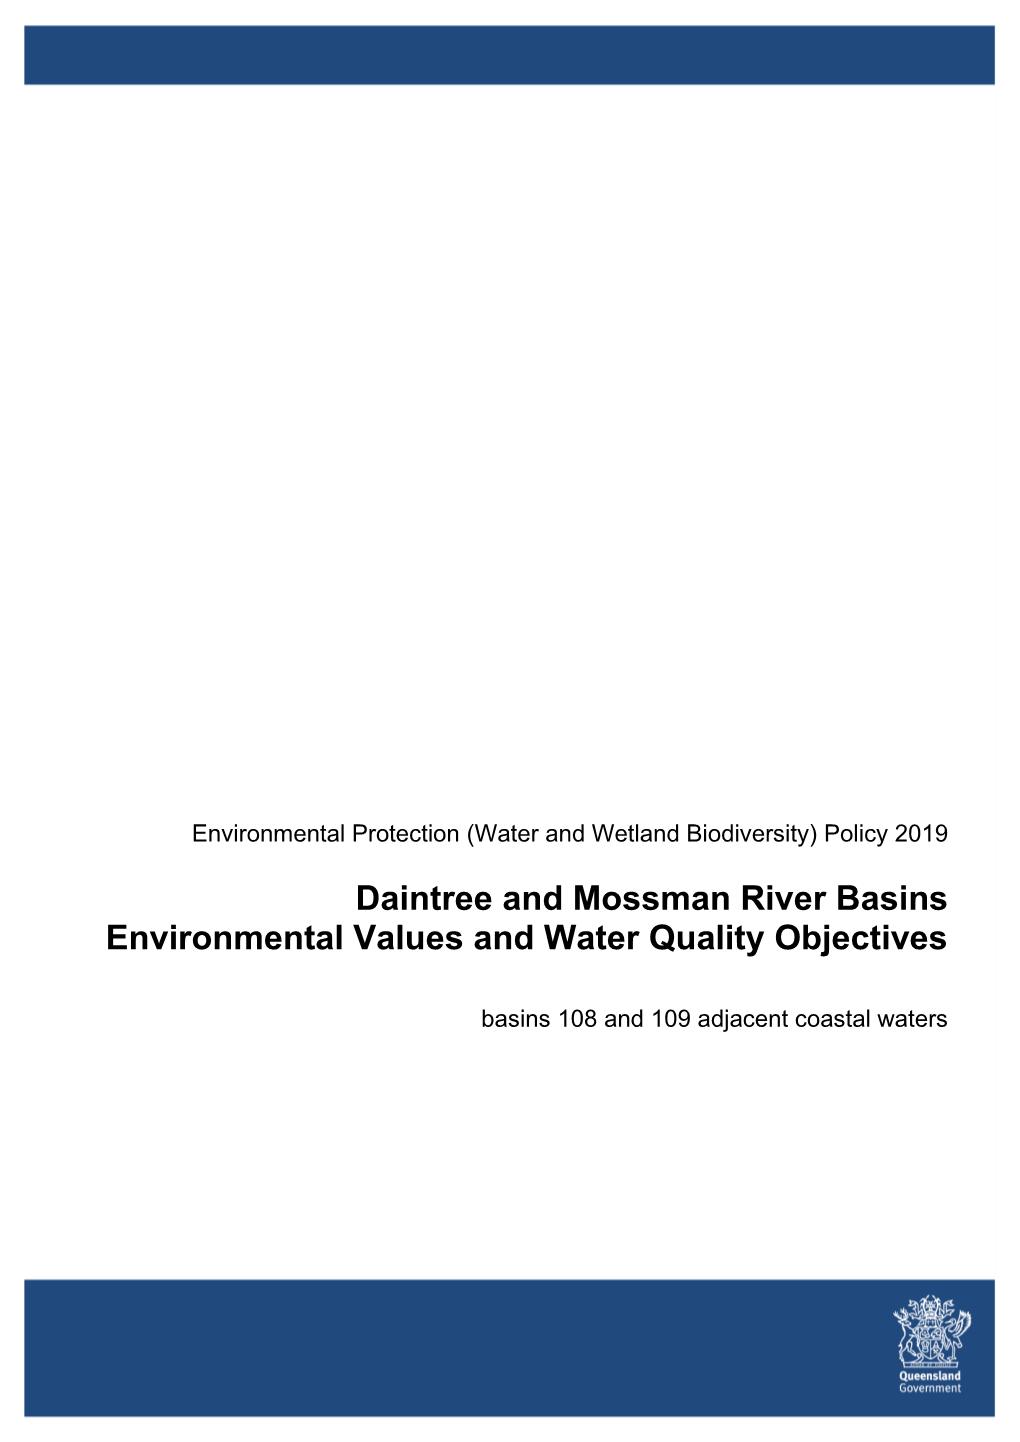 Daintree and Mossman River Basins Environmental Values and Water Quality Objectives